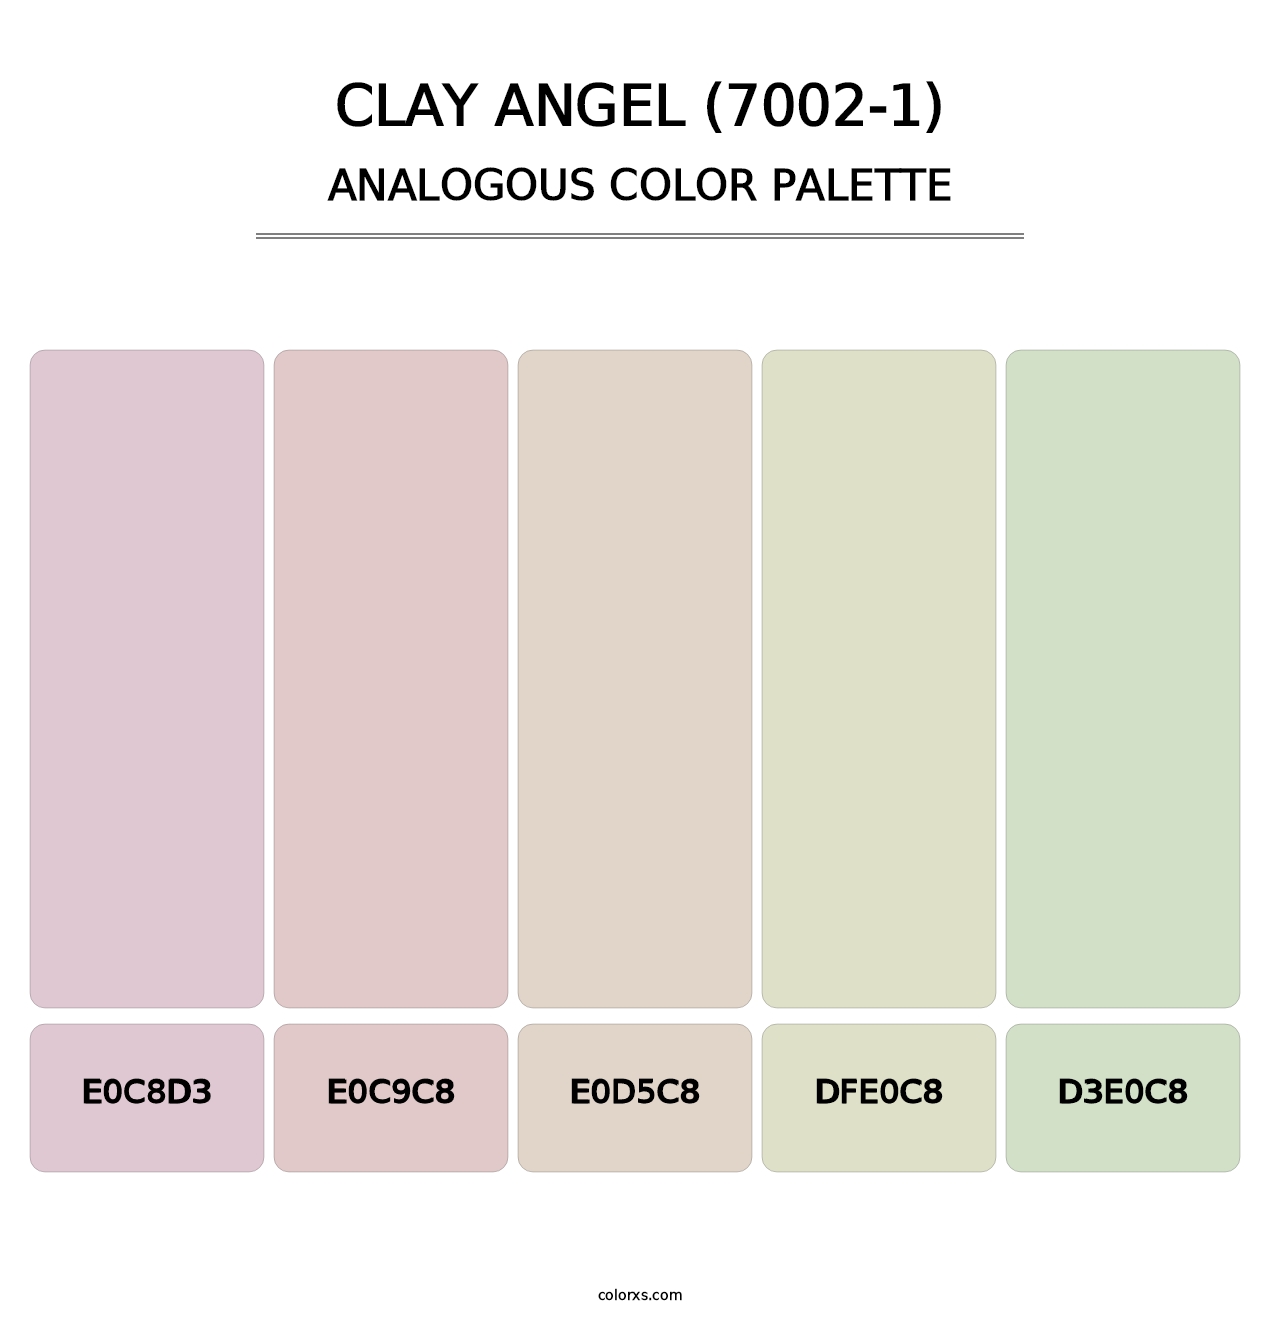 Clay Angel (7002-1) - Analogous Color Palette